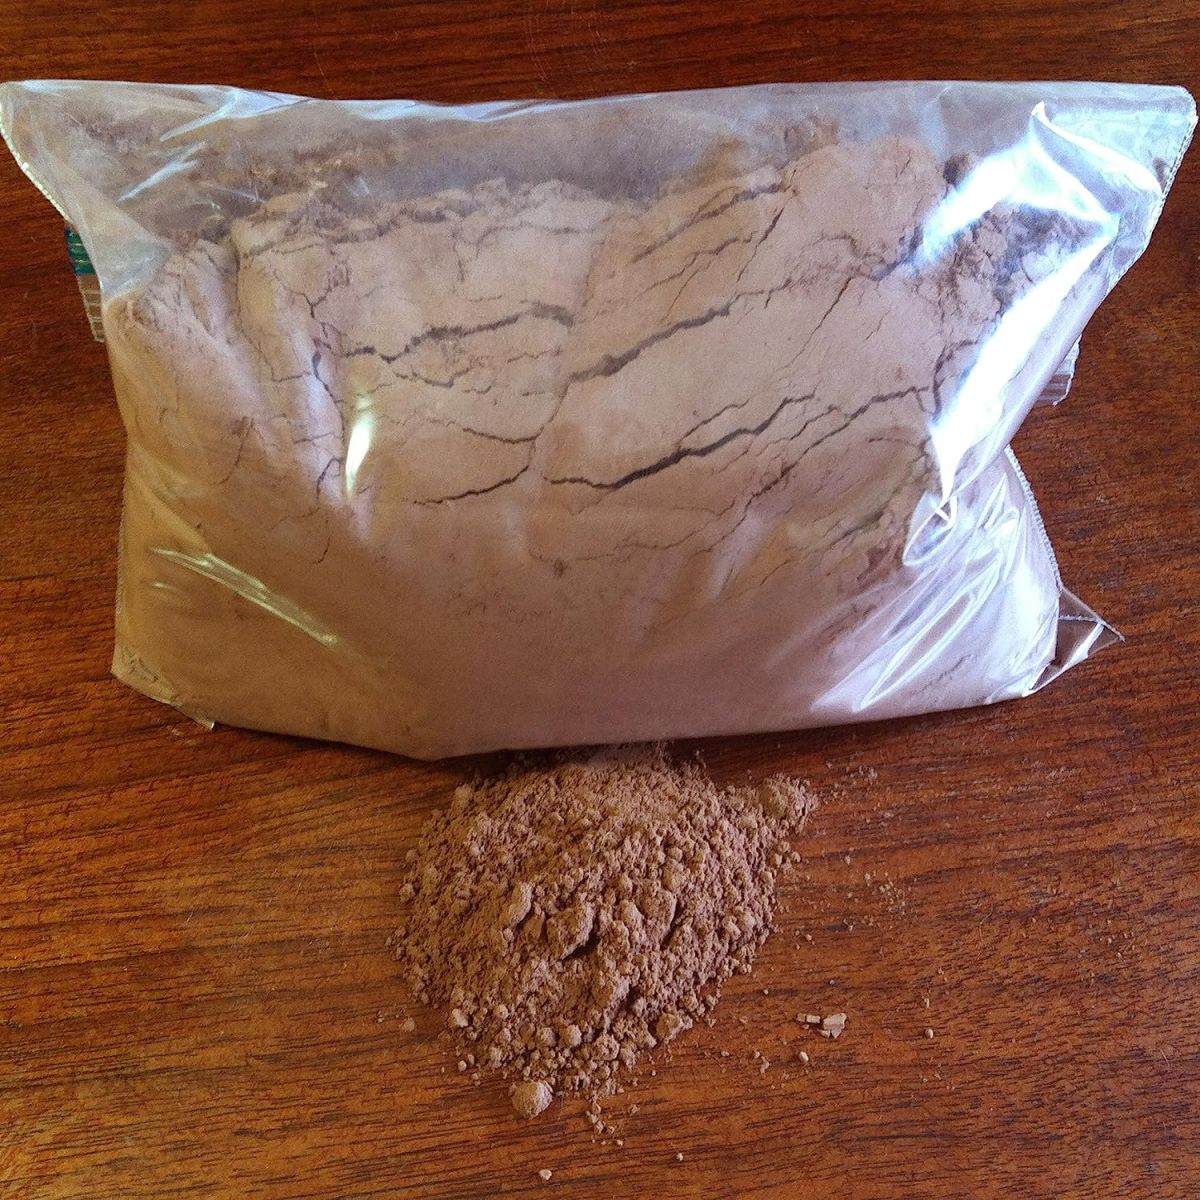 Red Clay Powder for Seed Balls and Seed Bombs (1000g)